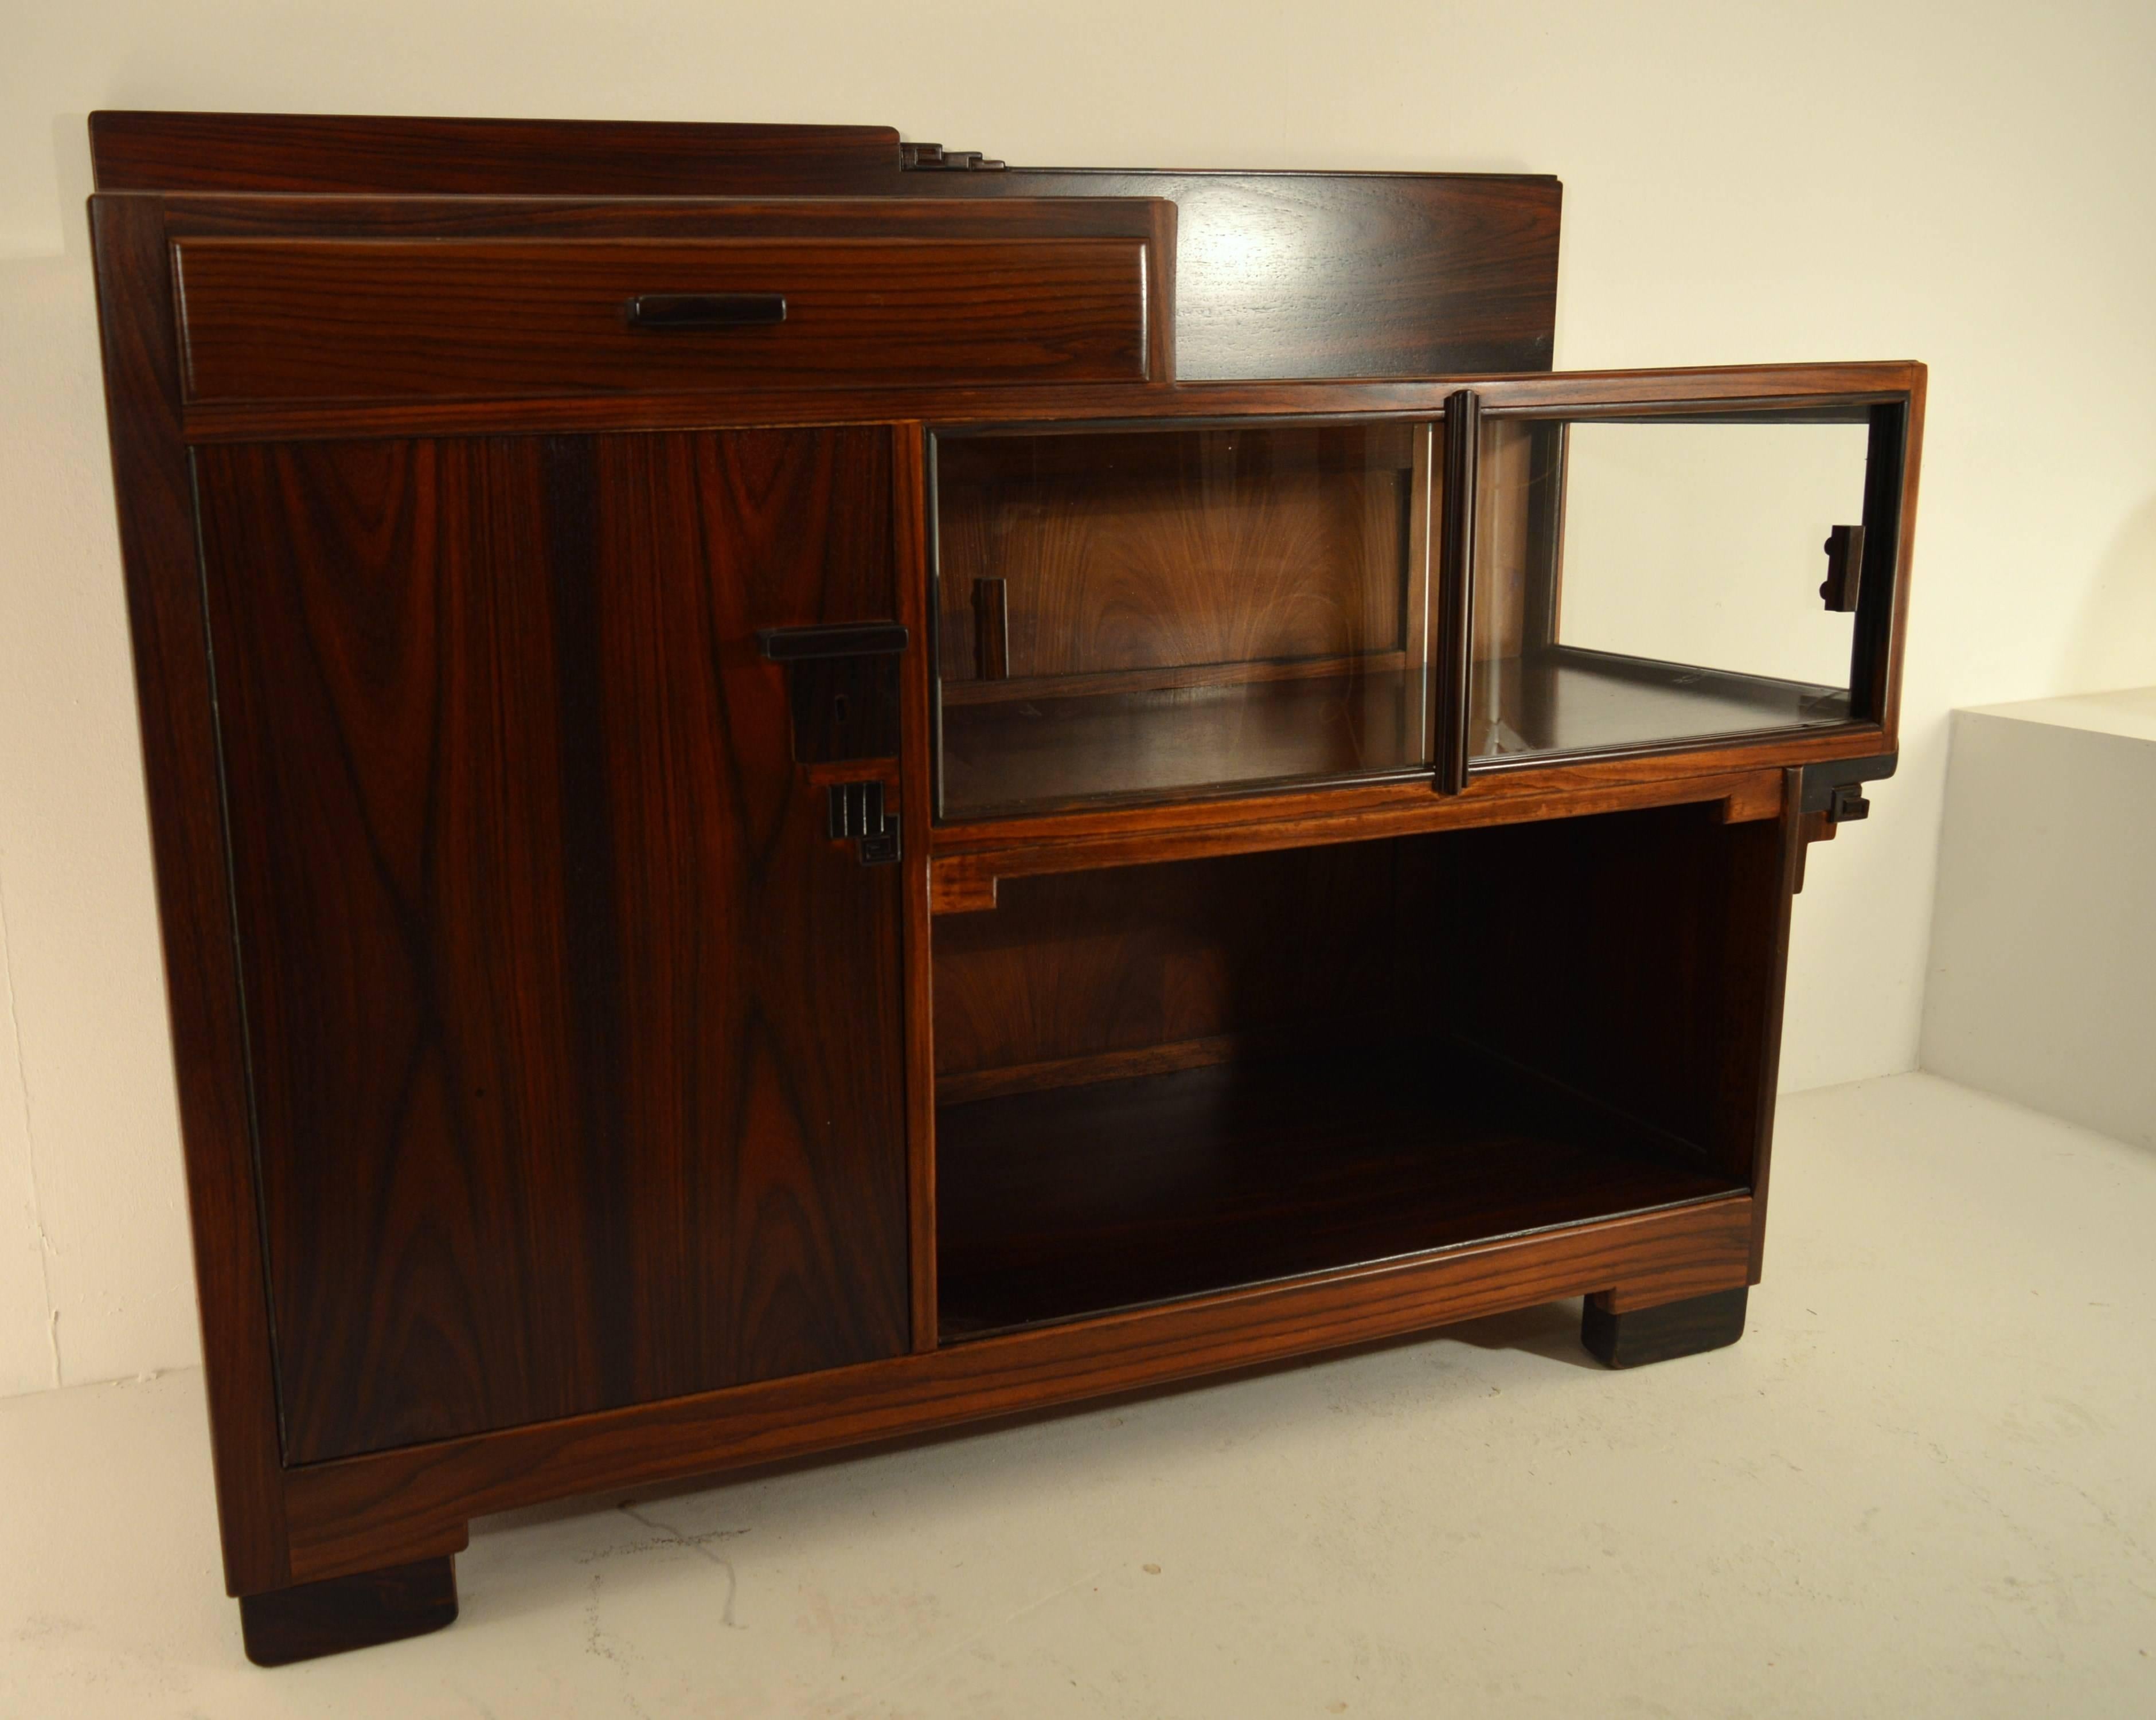 Art Deco rosewood tea cabinet in school of Amsterdam style 1930s. This cabinet has his typical Chinese influences and elements carried out in ebony.
Perfect restored condition.
   